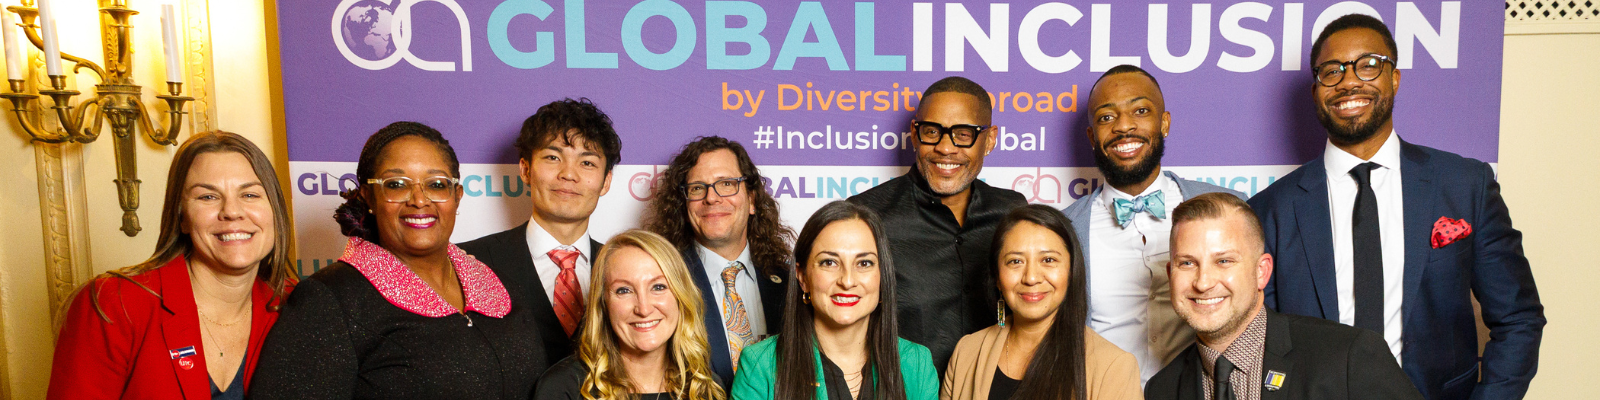 Excellence in Diversity and Inclusion in International Education Awardee recipients. 11 people smiling in front of a step and repeat banner